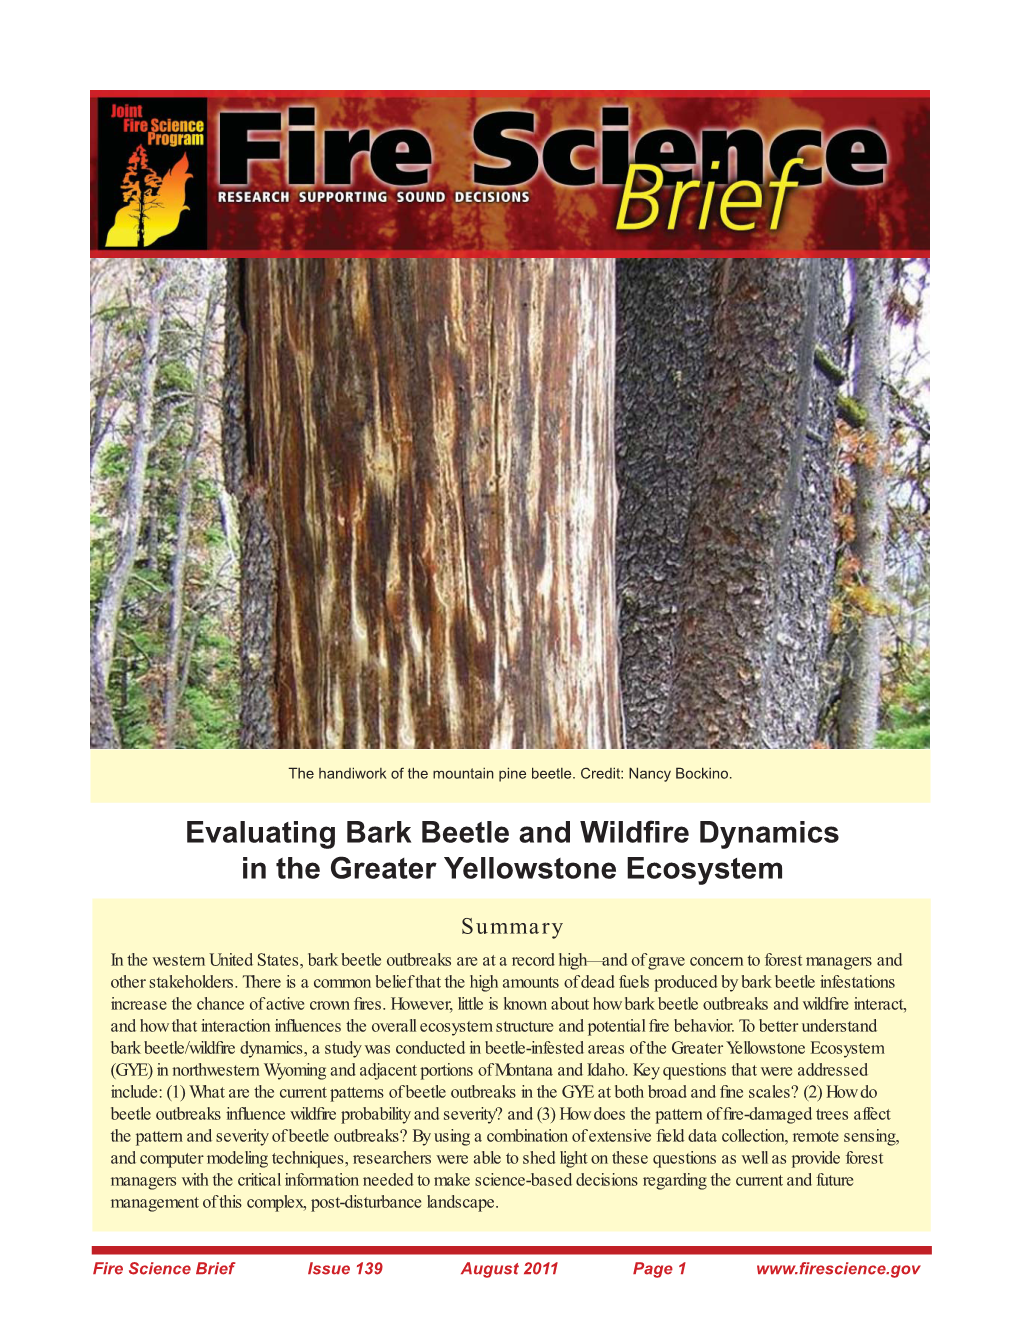 Evaluating Bark Beetle and Wildfire Dynamics in the Greater